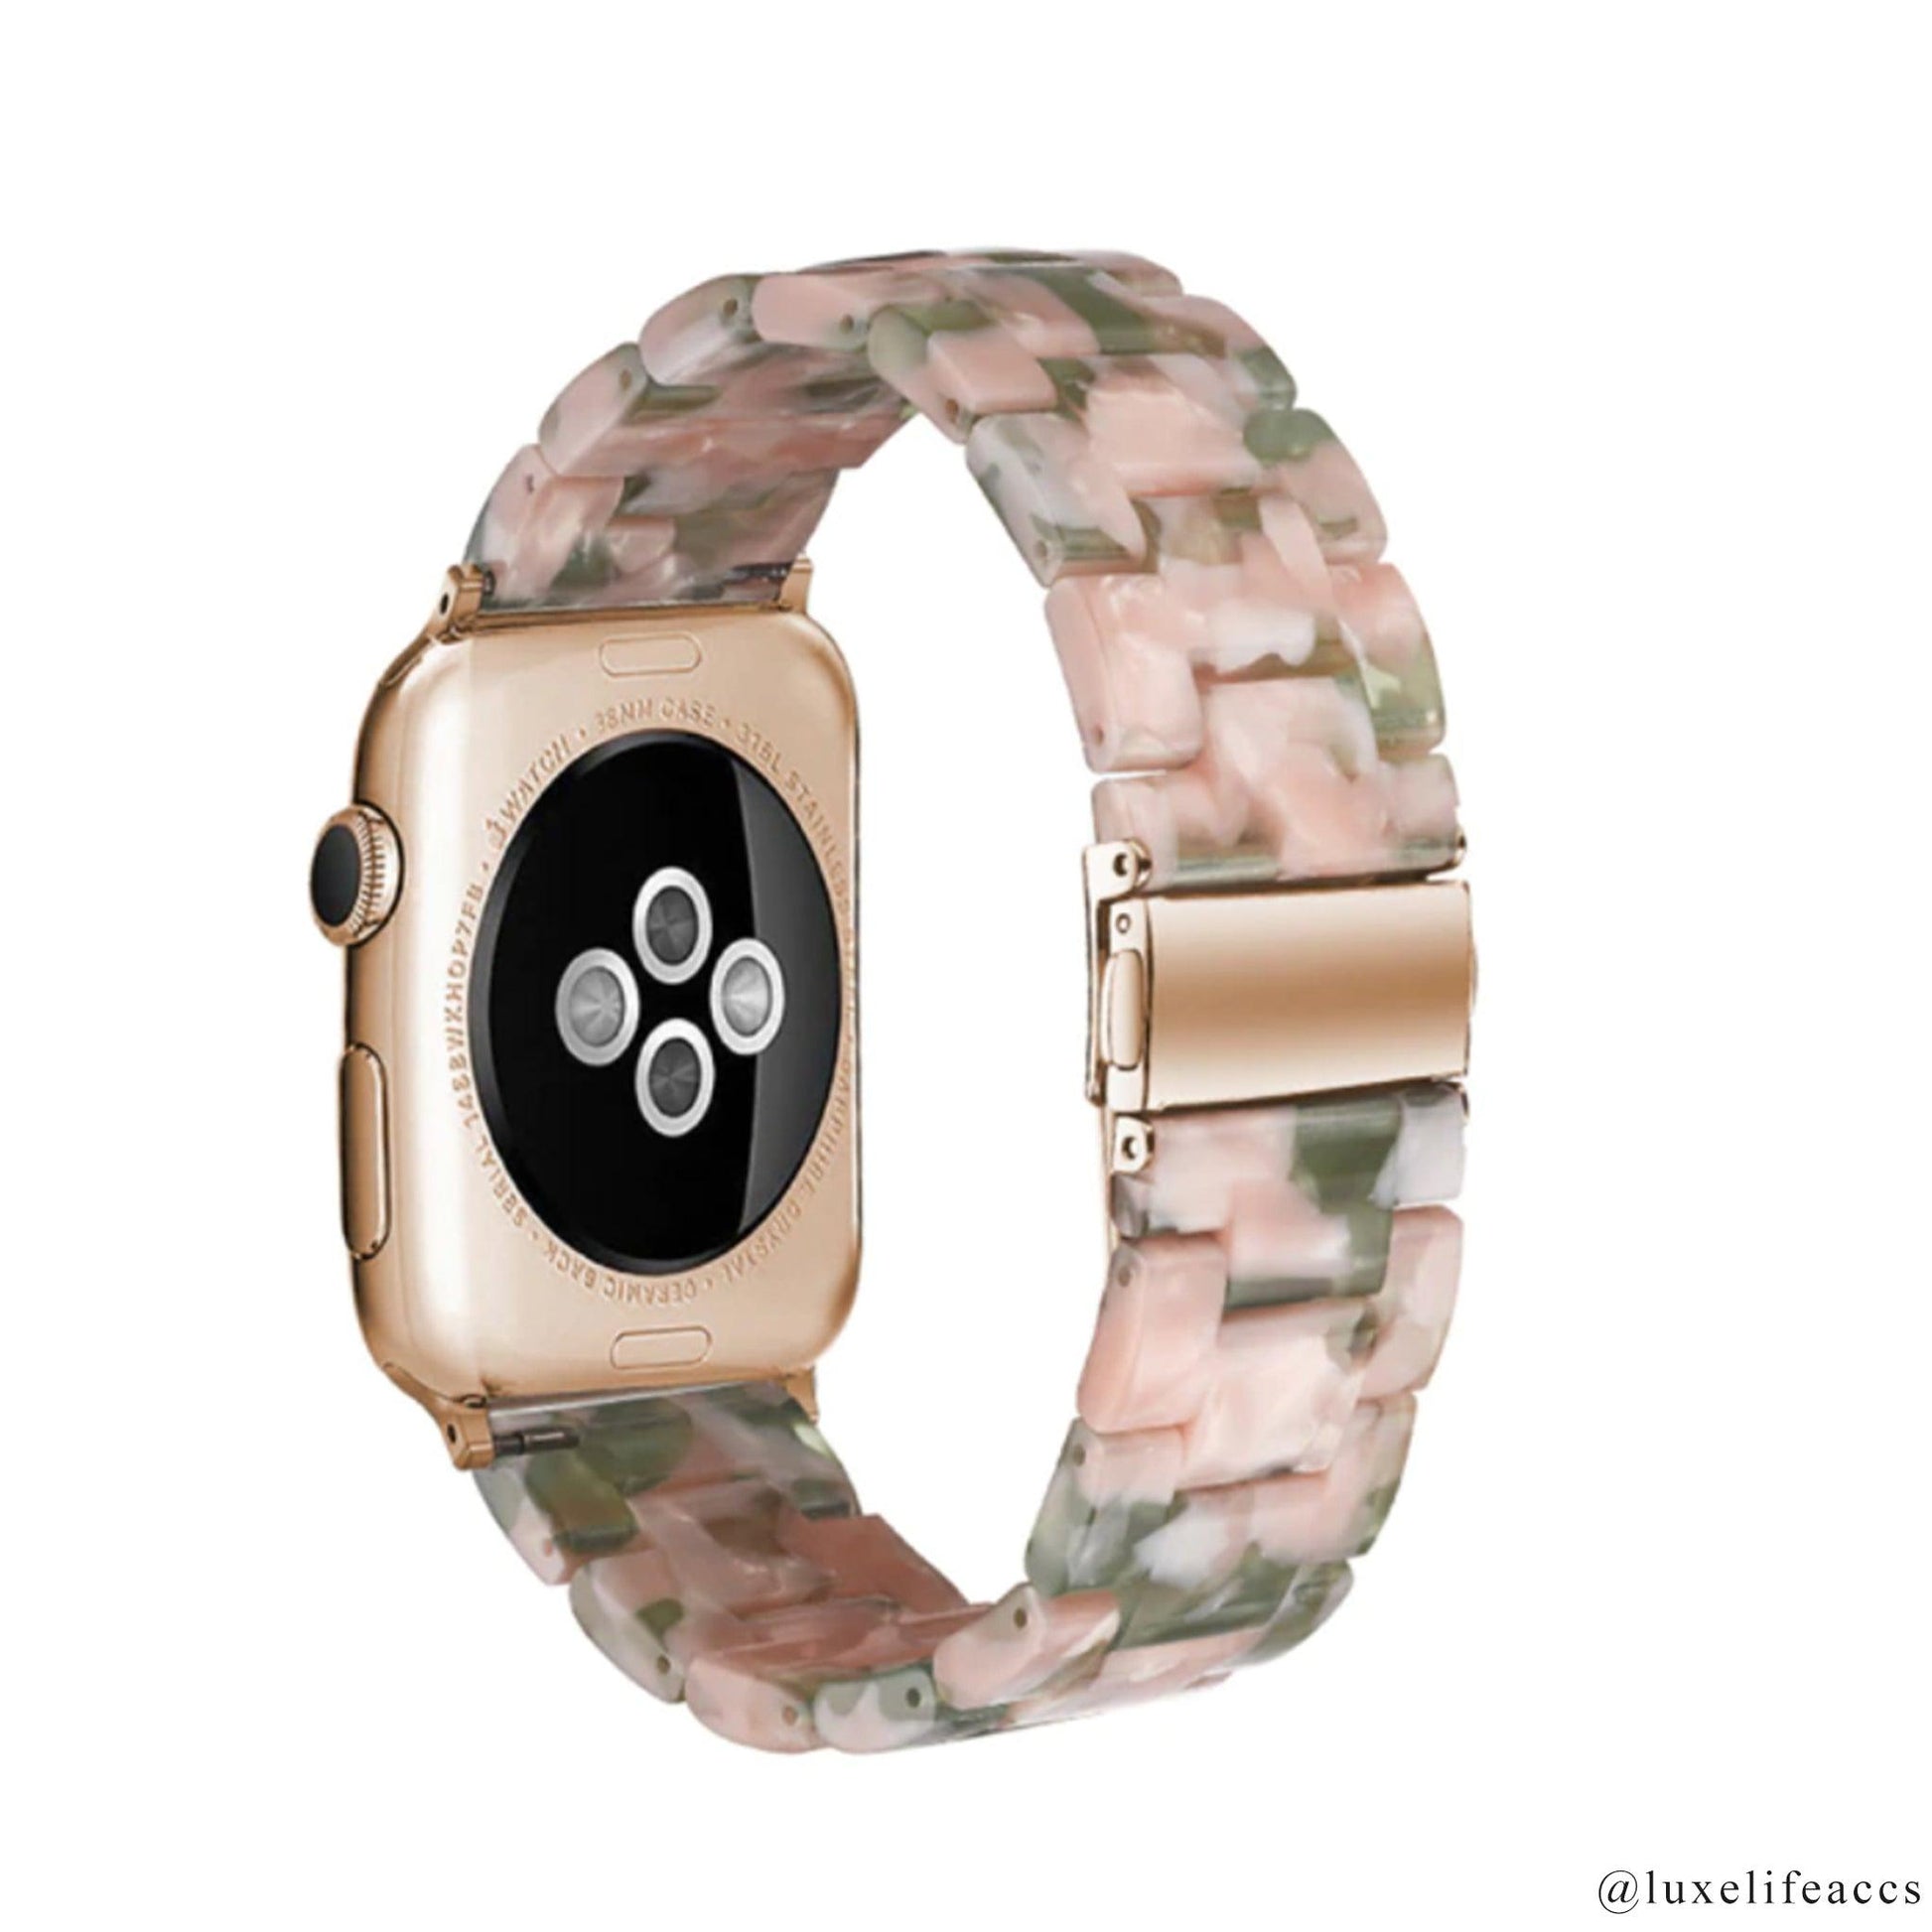 NEO Resin Apple Watch Strap - Luxe Life Accessories